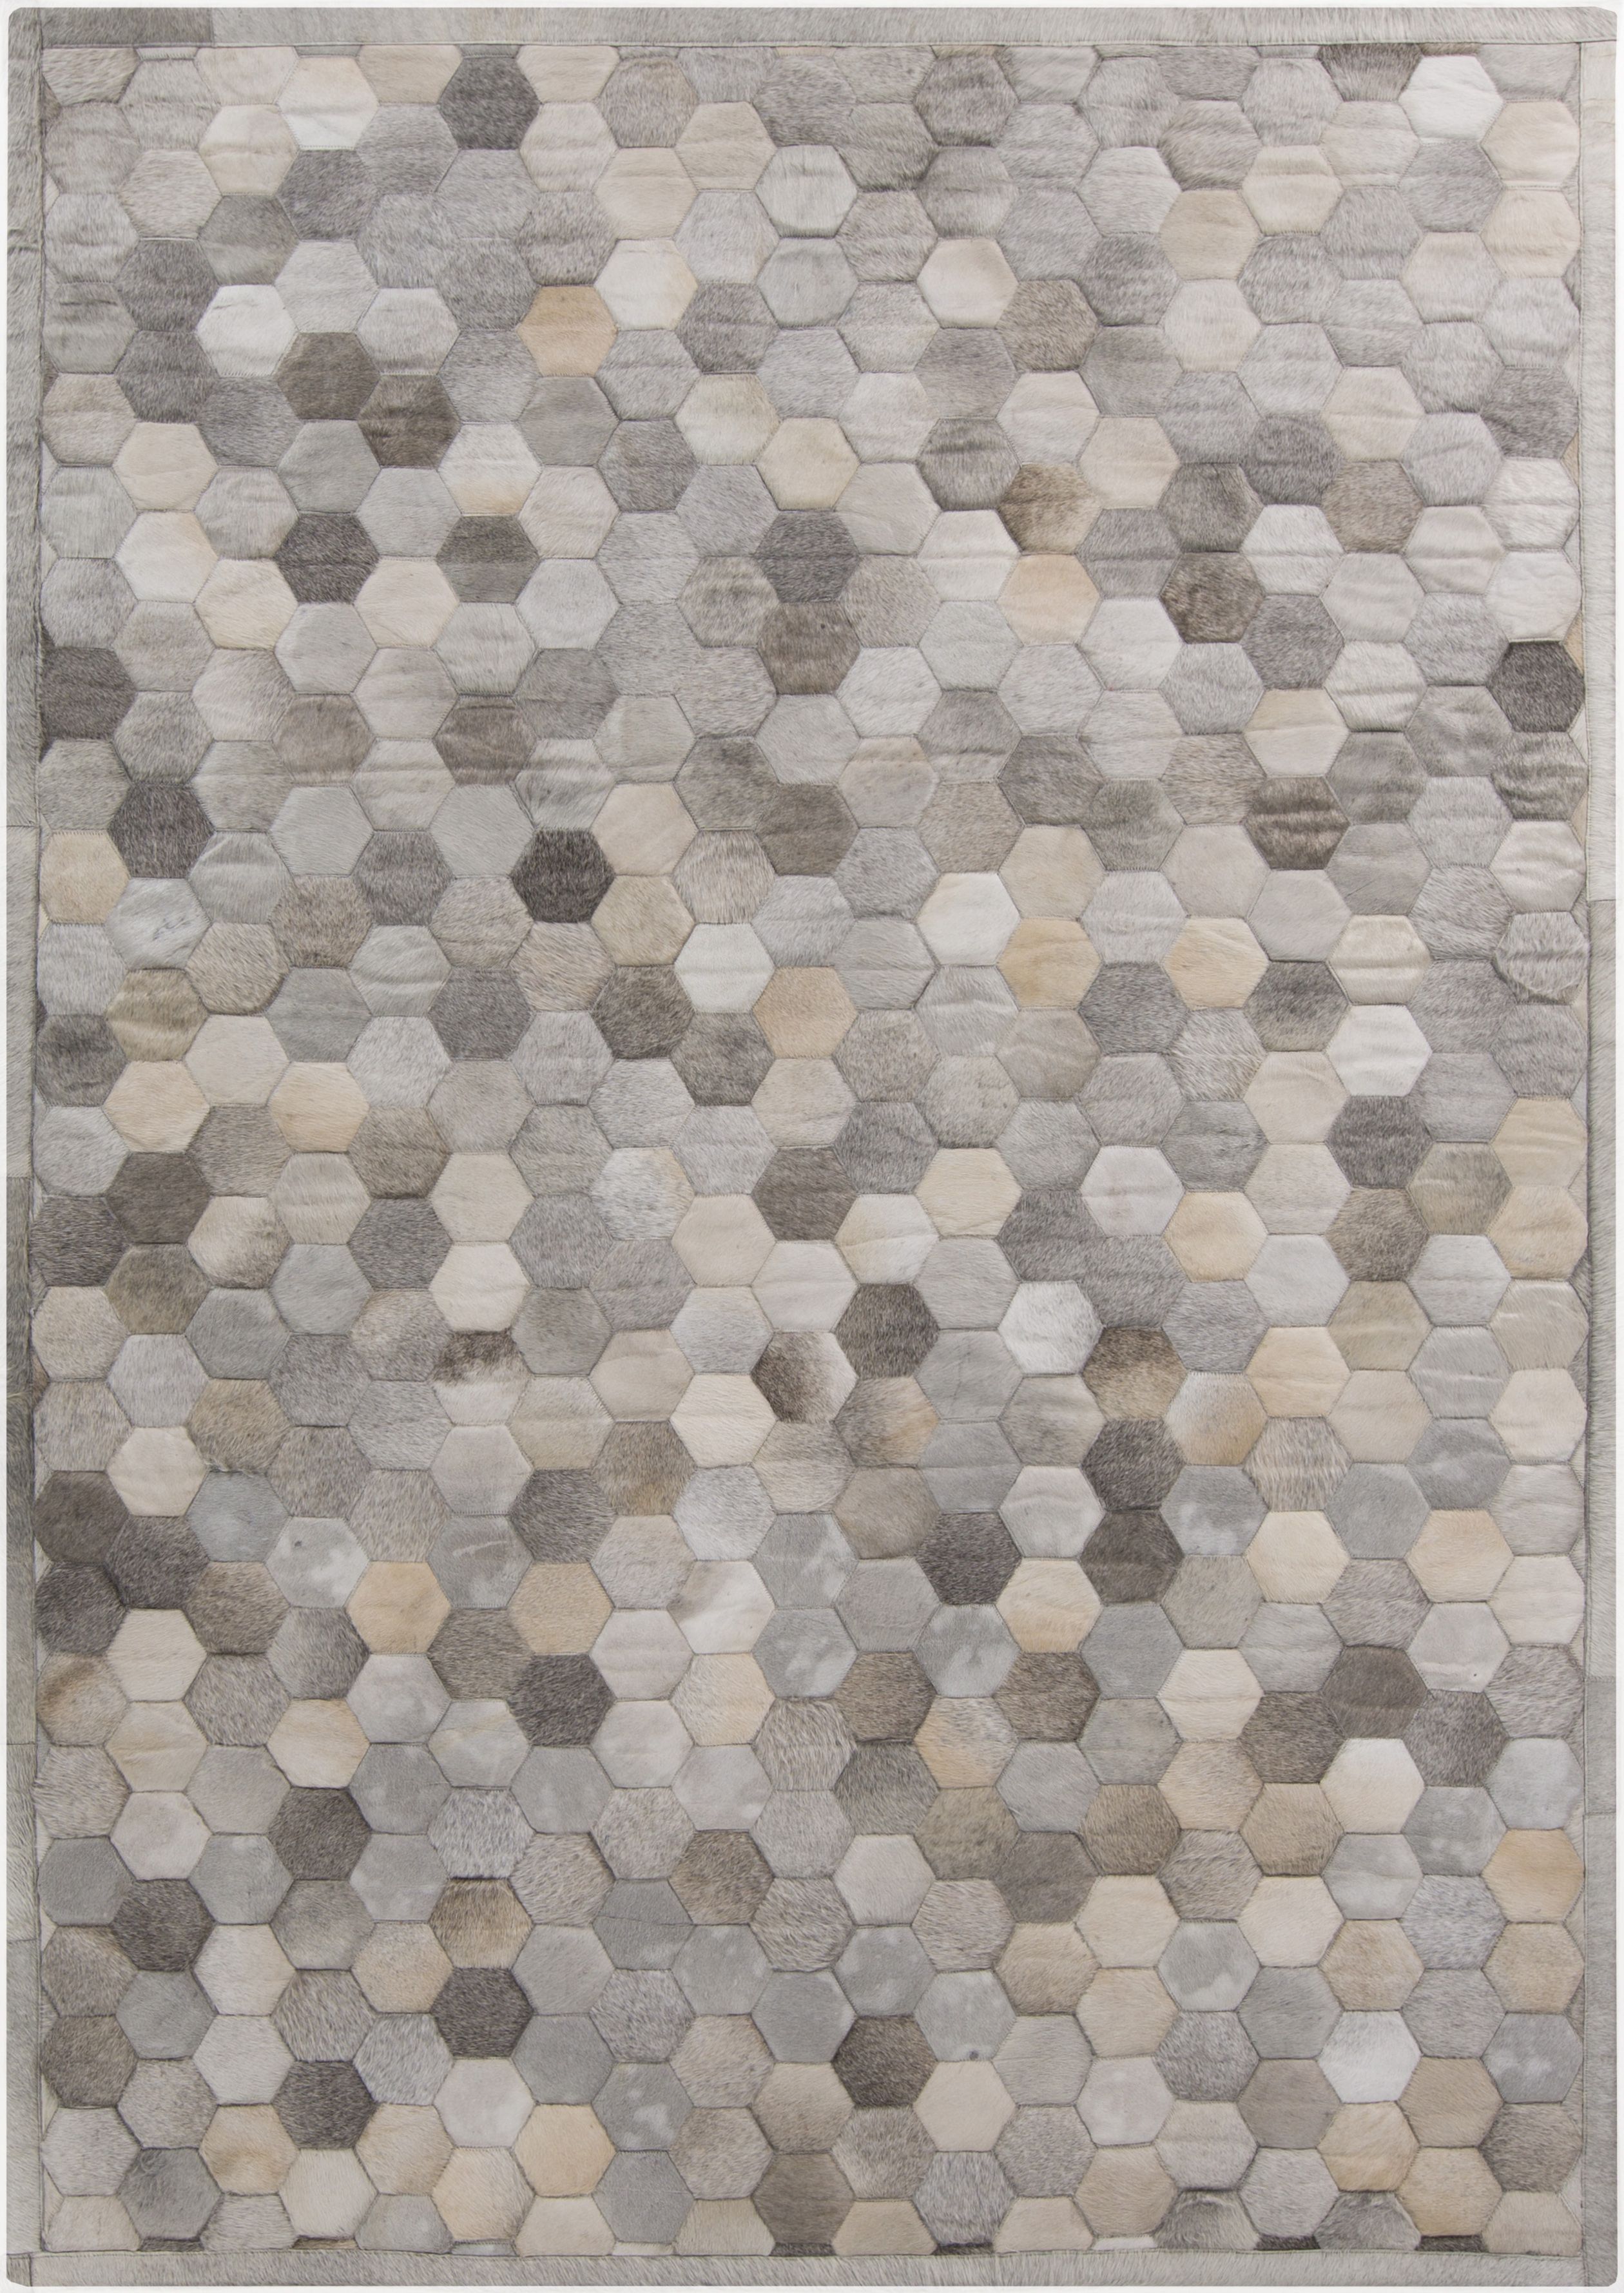 Piece Piece This Leather Geometric Rug Design Is Patched Pertaining To Geometric Carpet Patterns (View 13 of 15)